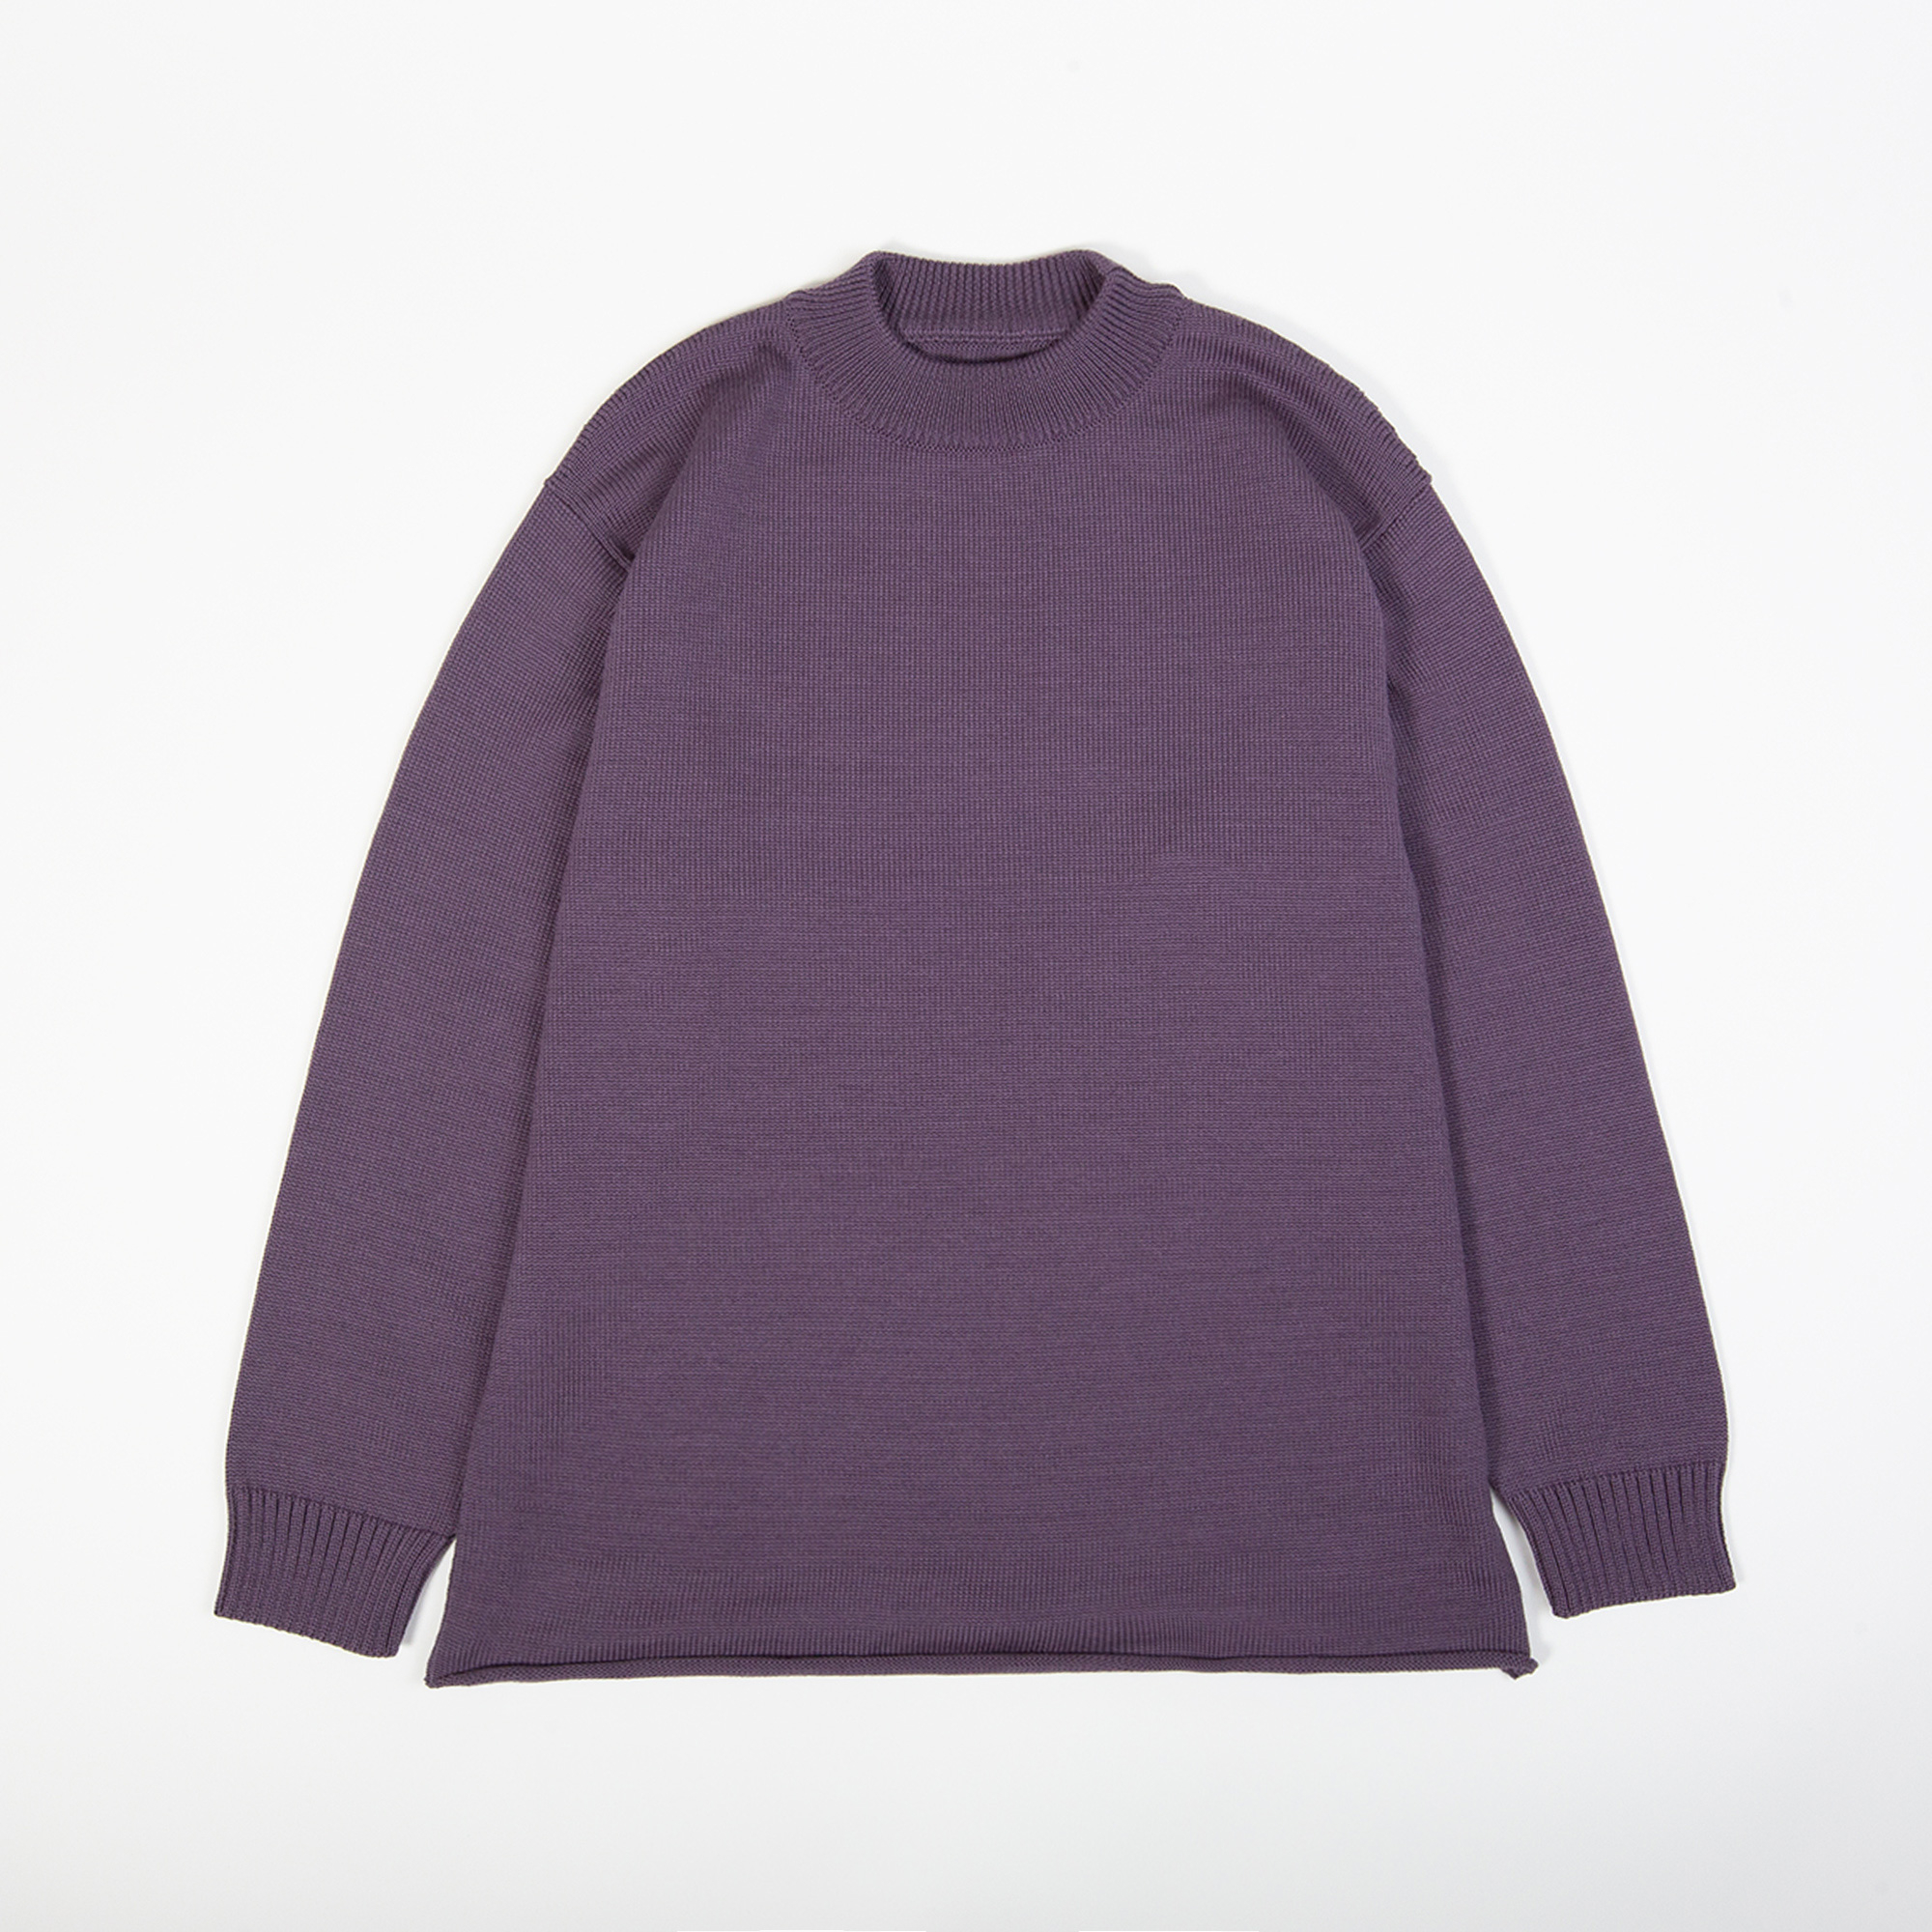 DYCE sweater in Purple color by Arpenteur